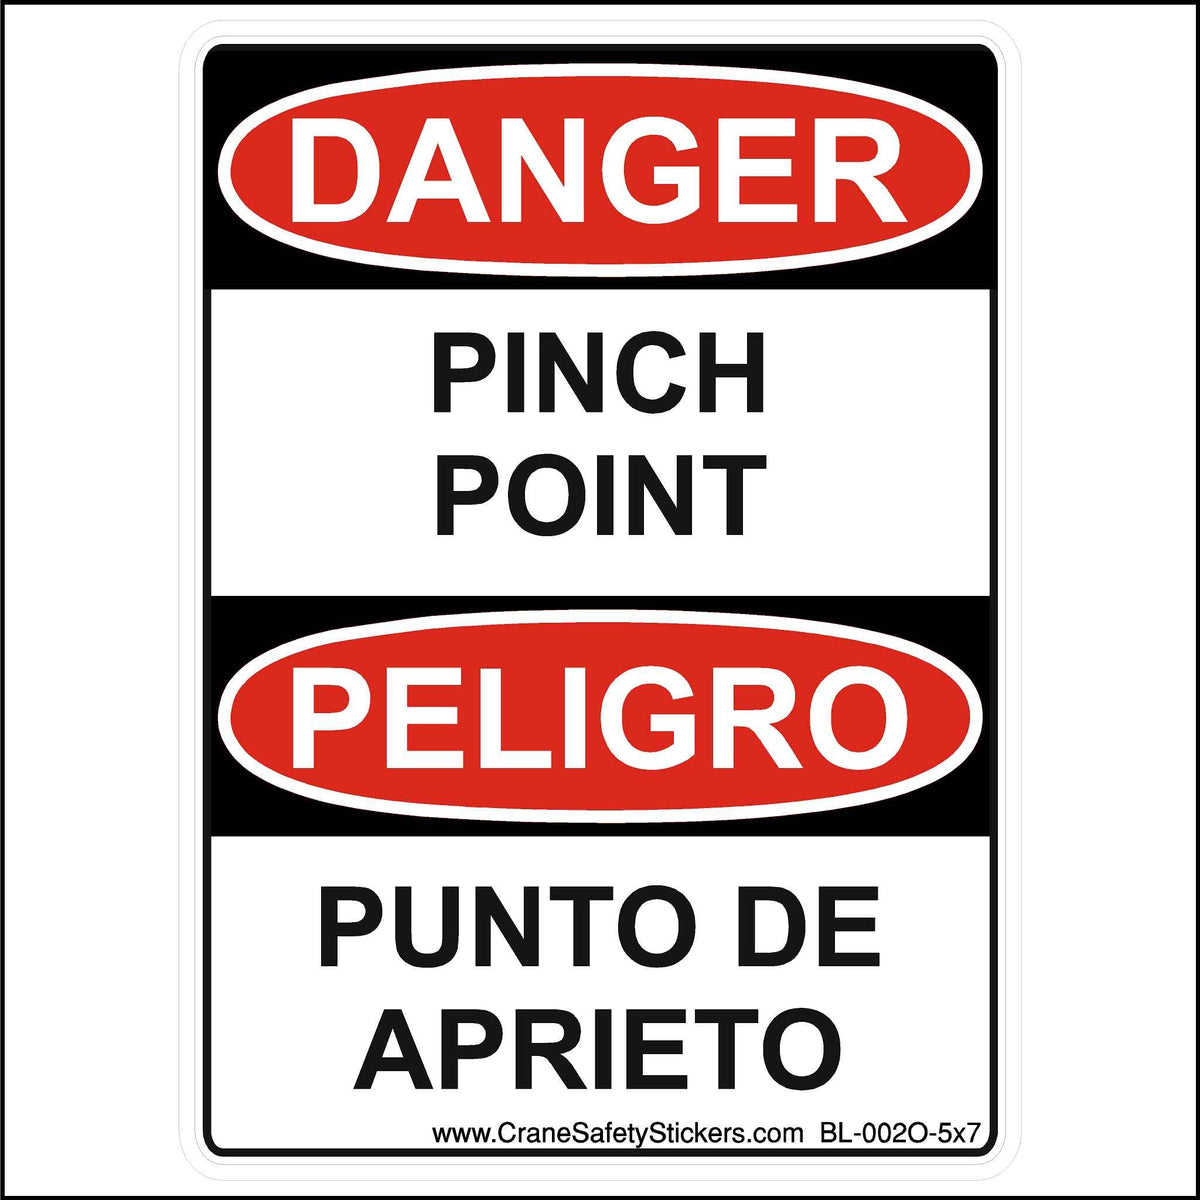 This 5x7 Inch Bilingual English and Spanish Pinch Point Safety Sticker Is Printed With. DANGER! Pinch Point, PELIGRO punto de aprieto.